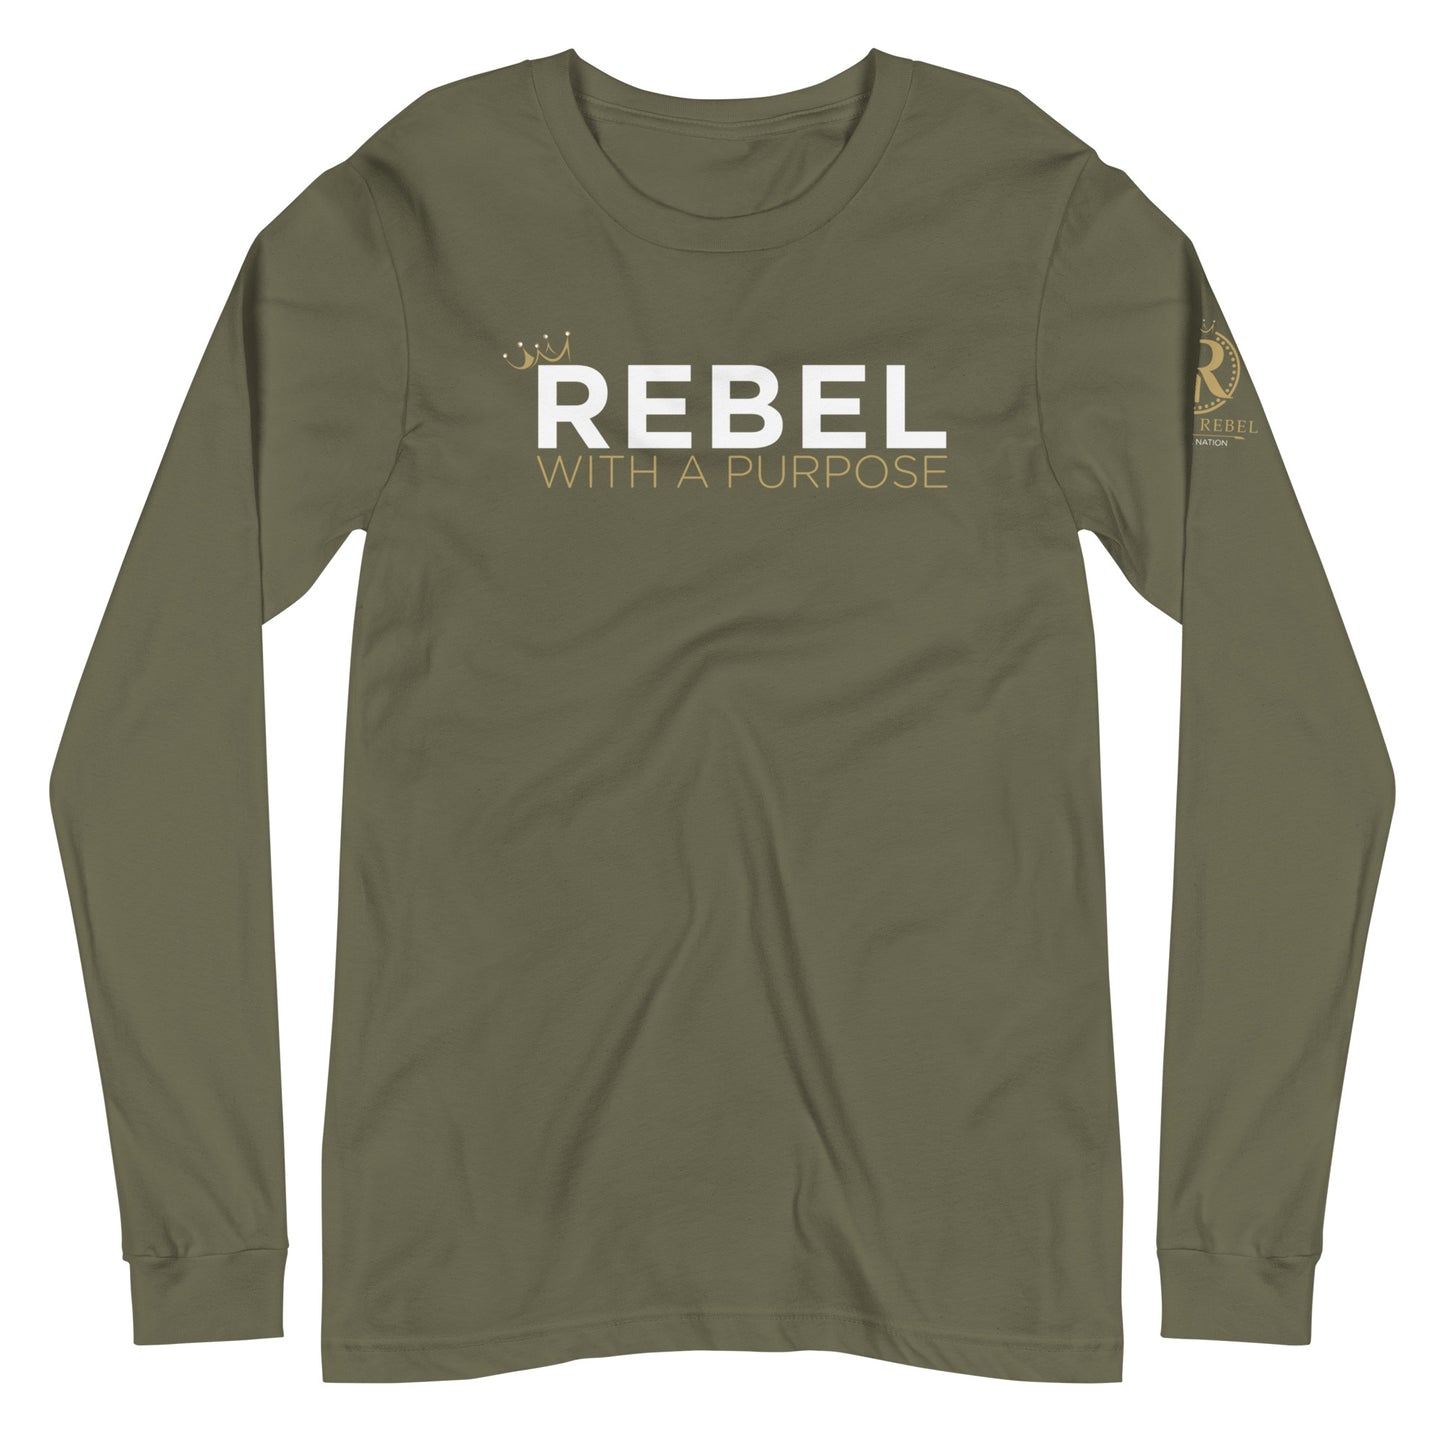 Rebel with a Purpose Unisex Long Sleeve Tee